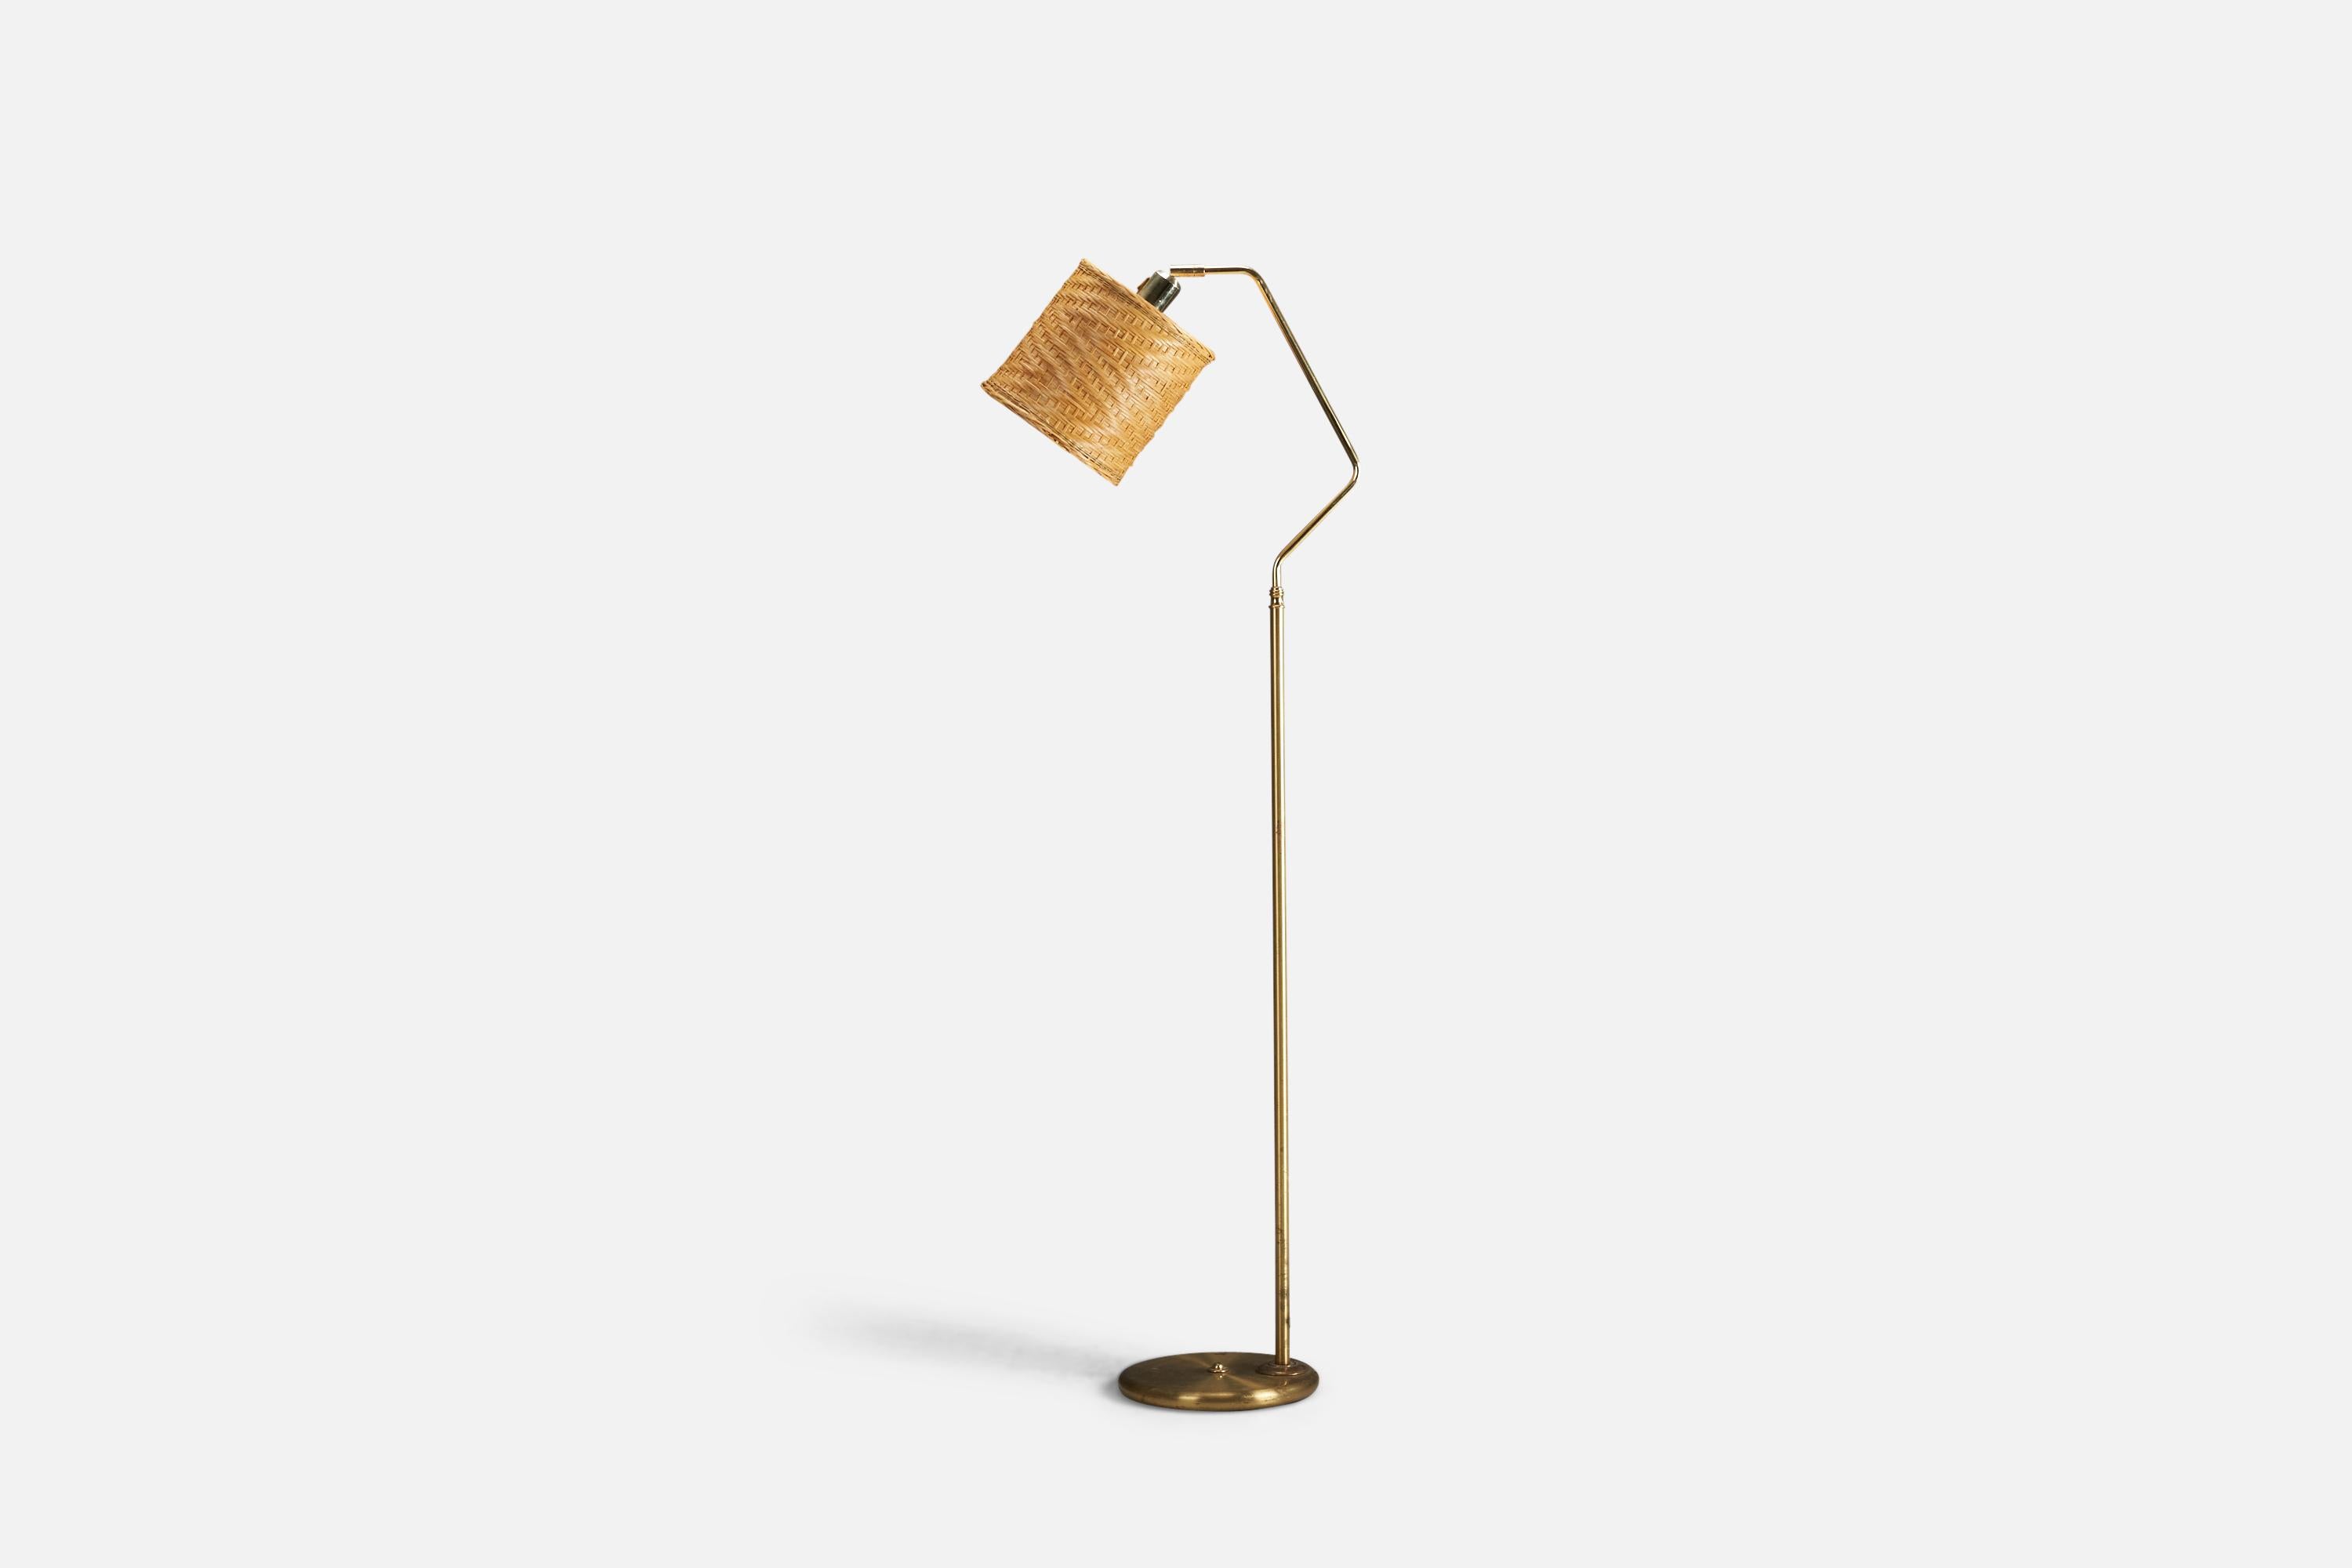 A brass and rattan floor lamp designed and produced by a Swedish Designer, Sweden, 1970s.

Socket takes standard E-26 medium base bulb.

There is no maximum wattage stated on the fixture.